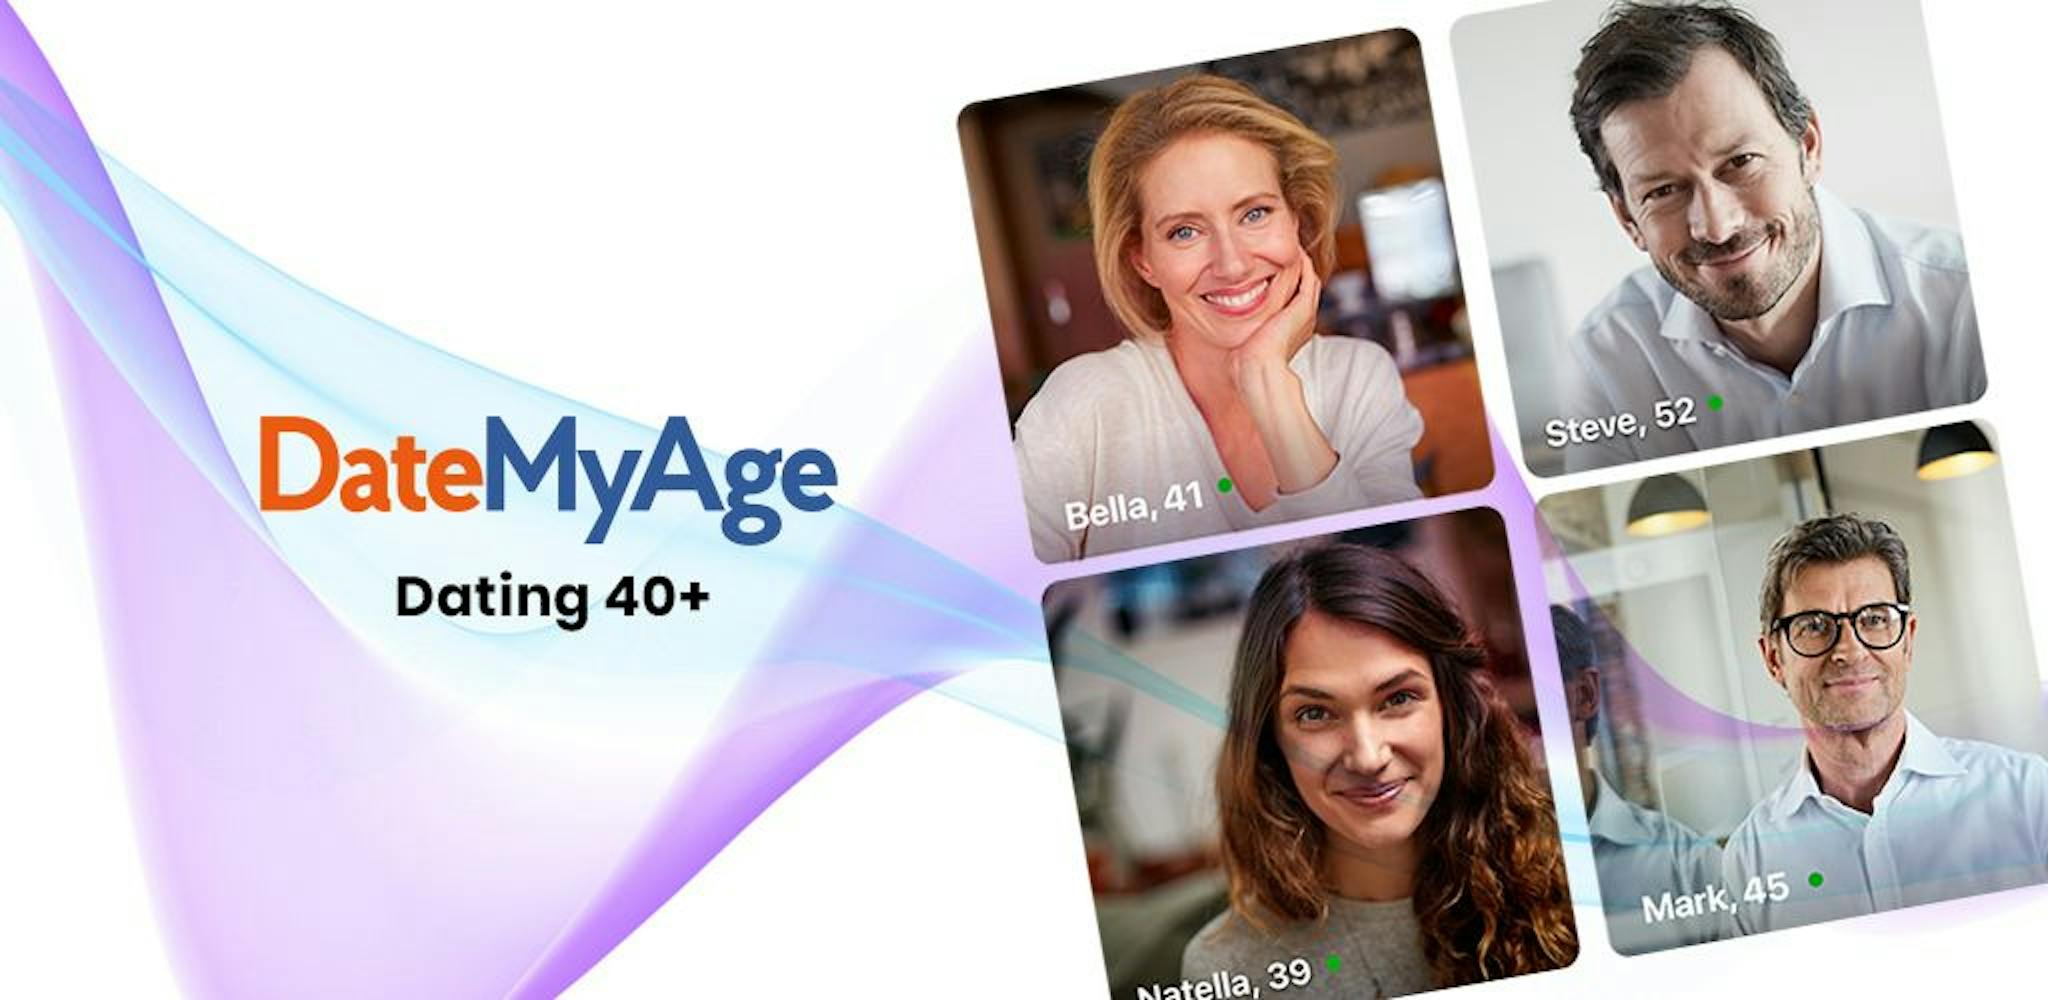 DateMyAge — a niche dating app by Social Discovery Group for individuals over the age of 40